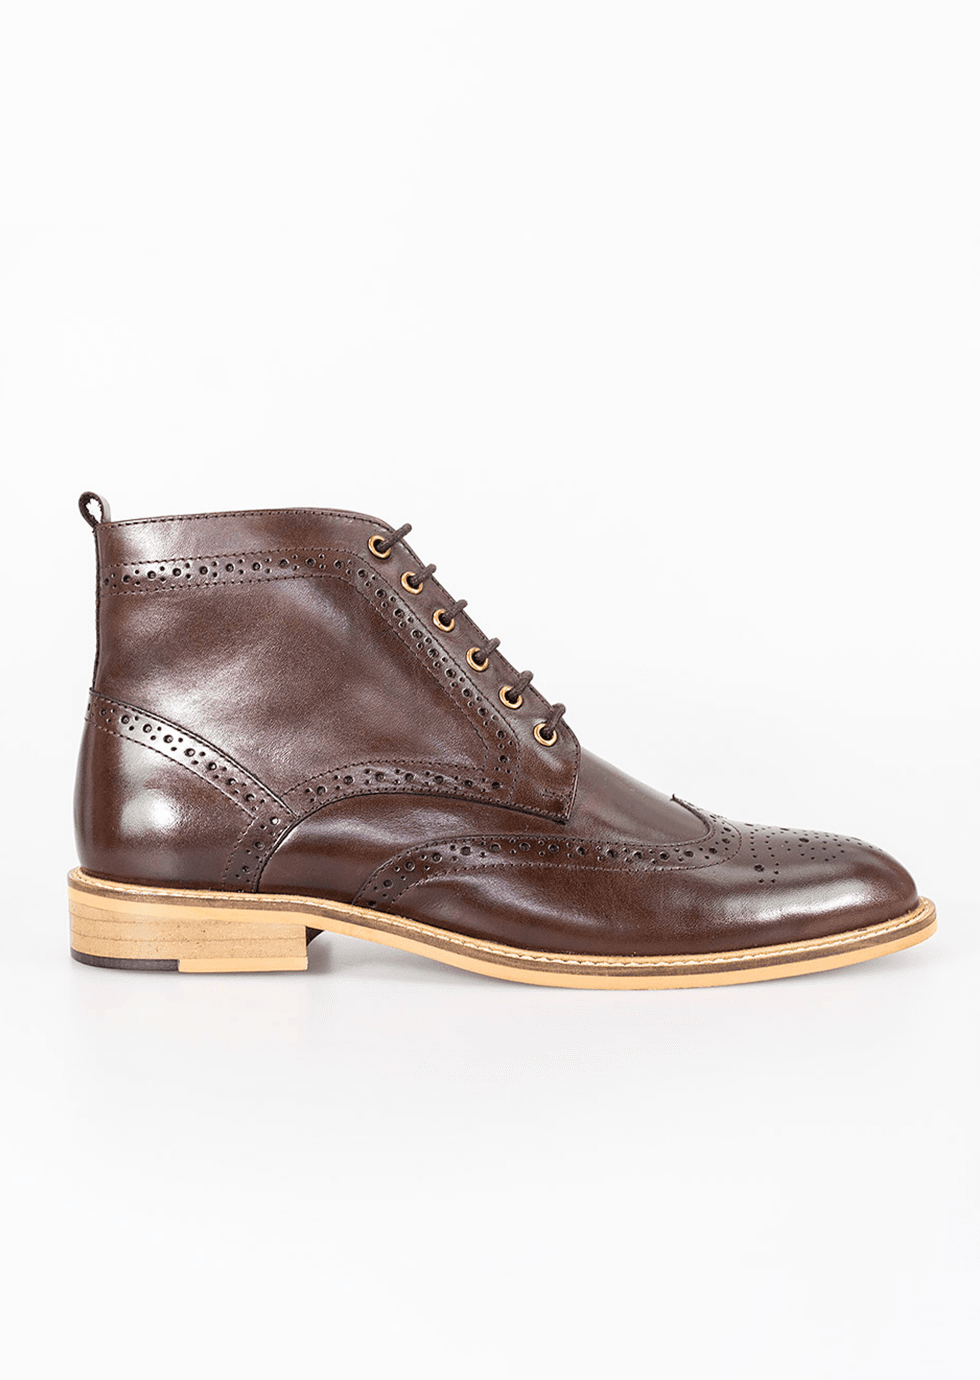 HOLMES BROWN LEATHER LACE UP BOOTS